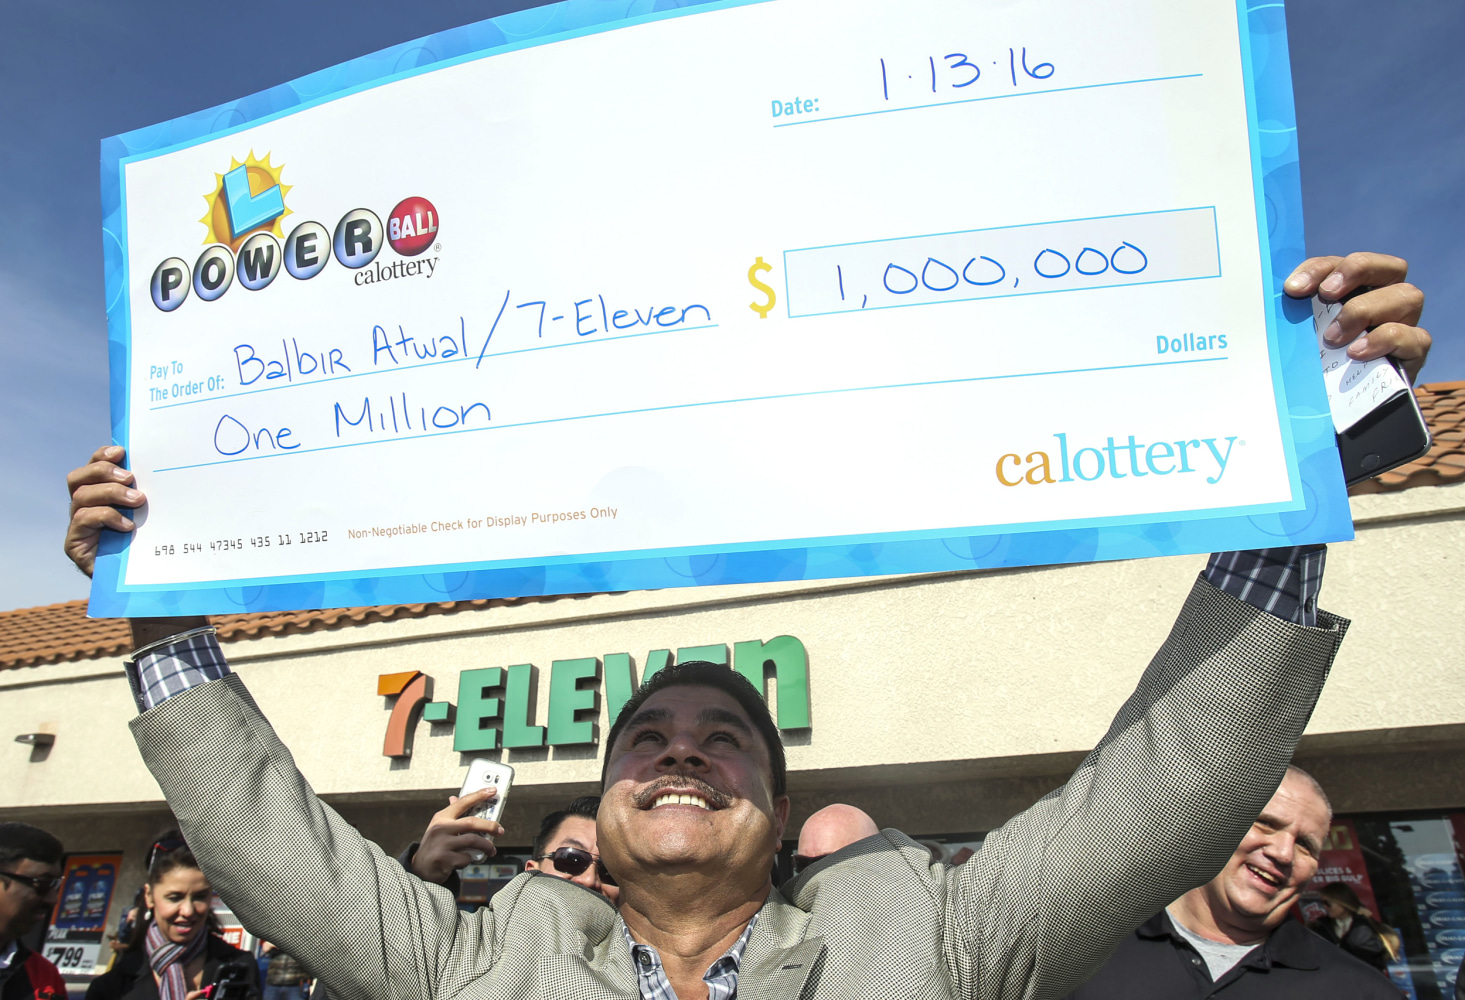 Powerball Jackpot Winners Remain Mystery, Dozens of Others Hit for $1 Million - NBC News1465 x 1000